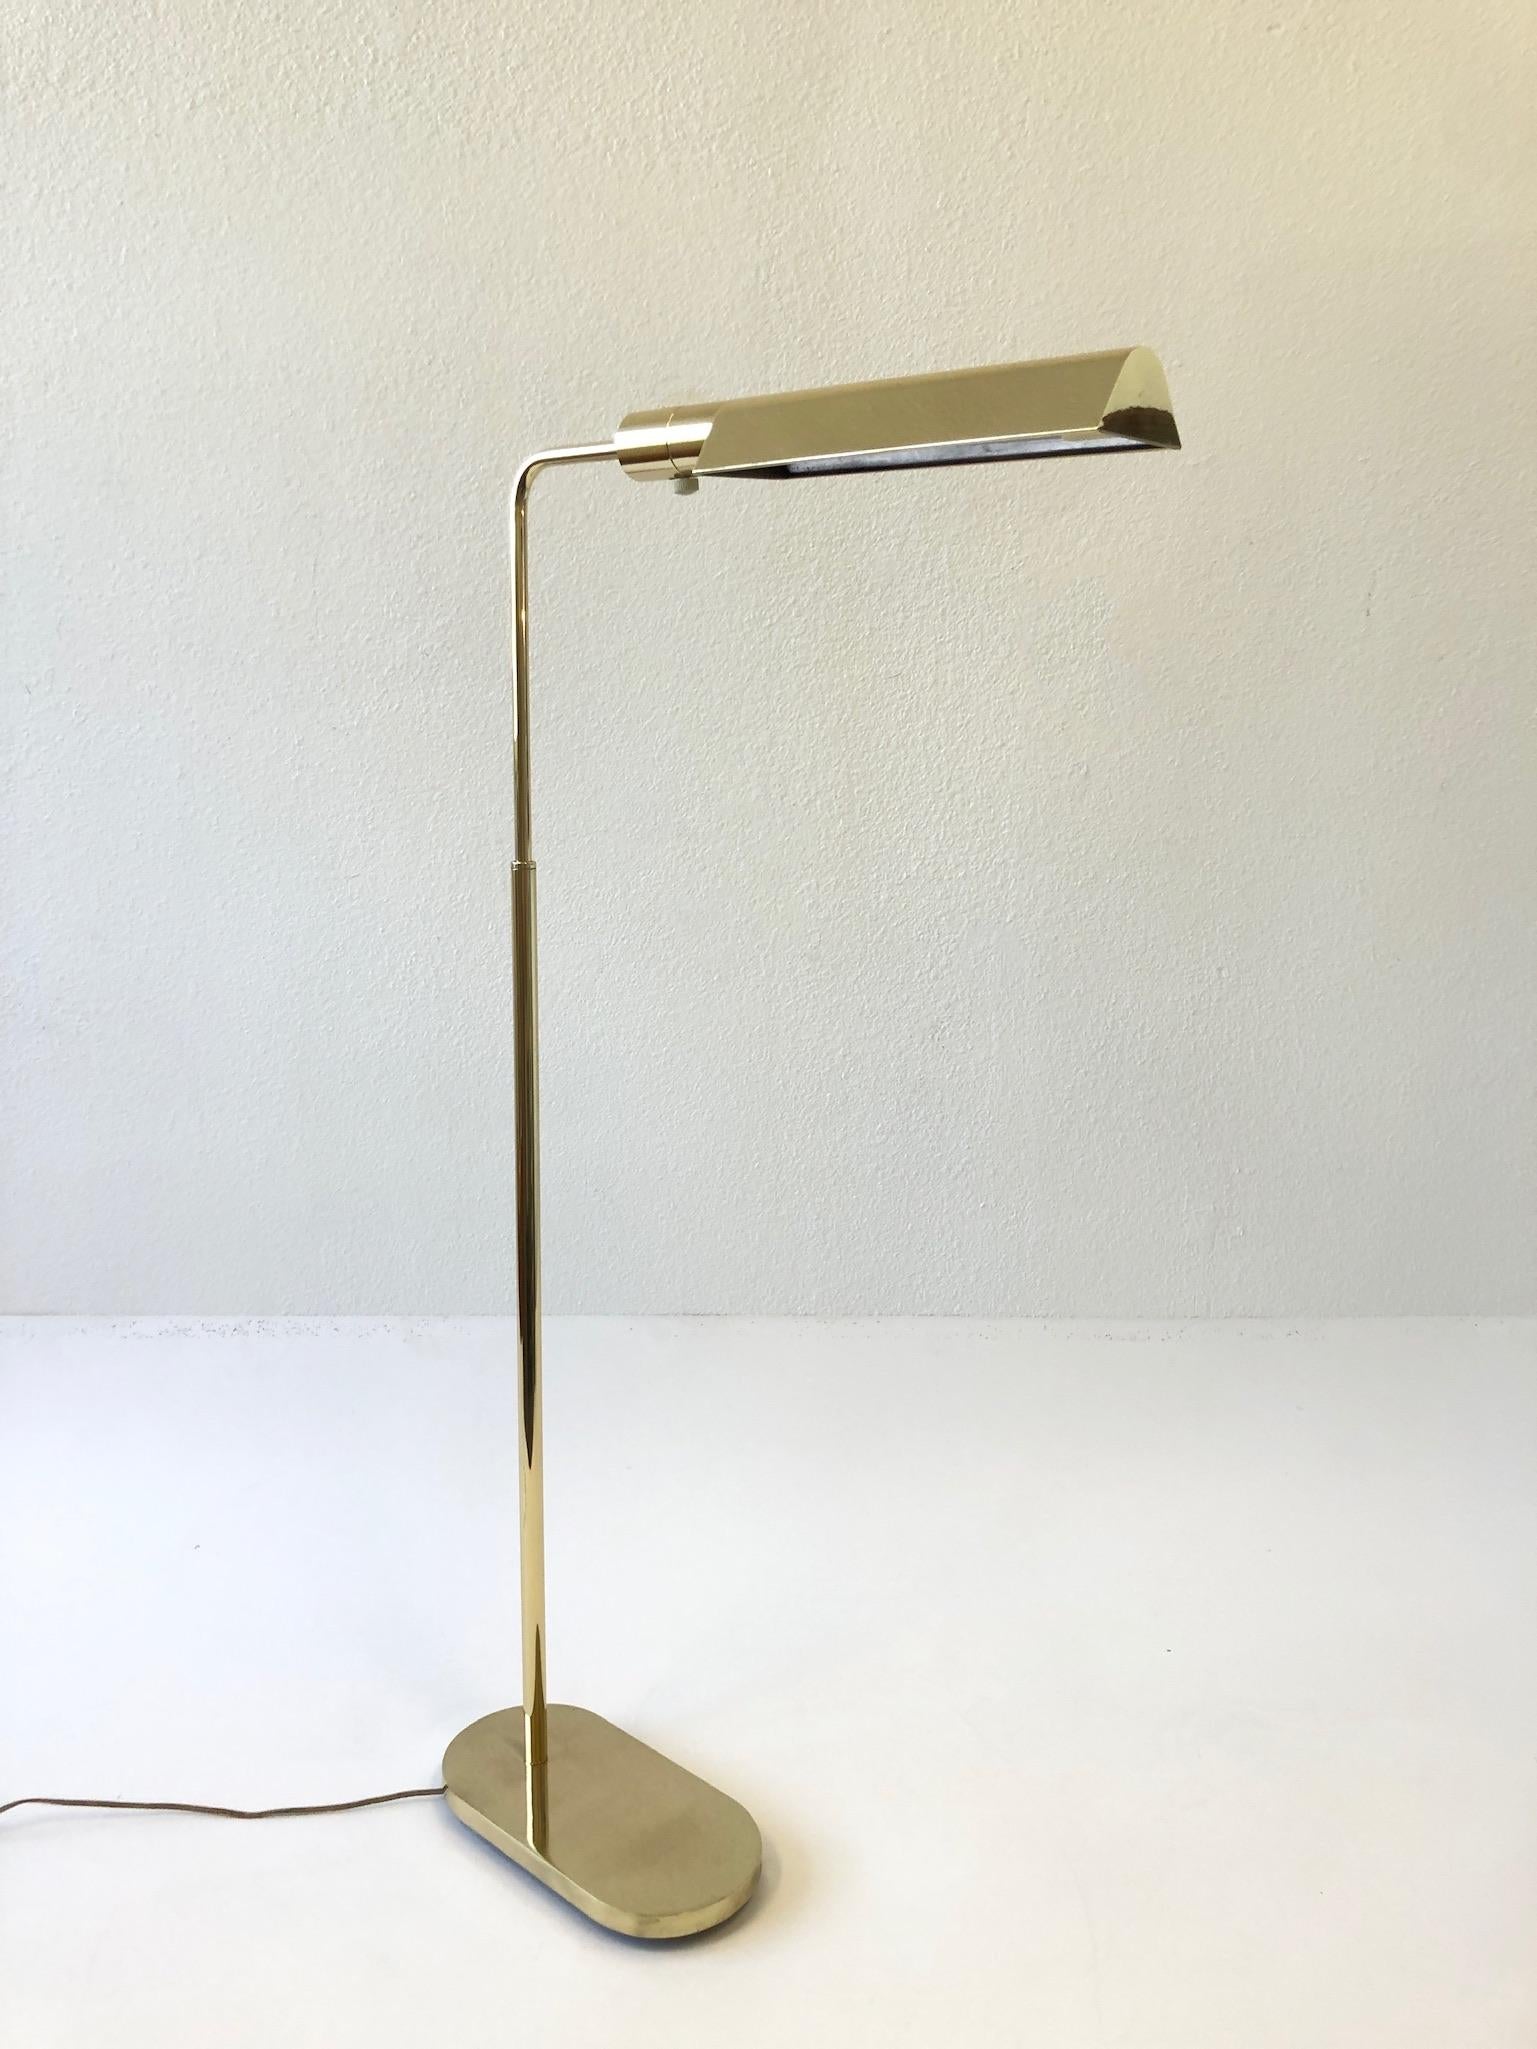 1970’s polish brass adjustable floor lamp by Casella Lighting.
When all the way up the high is 48”, when all the way down the high is 33”, it can rotated 360*.
The base is 12” wide 6” deep.
Full range dimmer, 75w max bulb.
Overall dimensions: